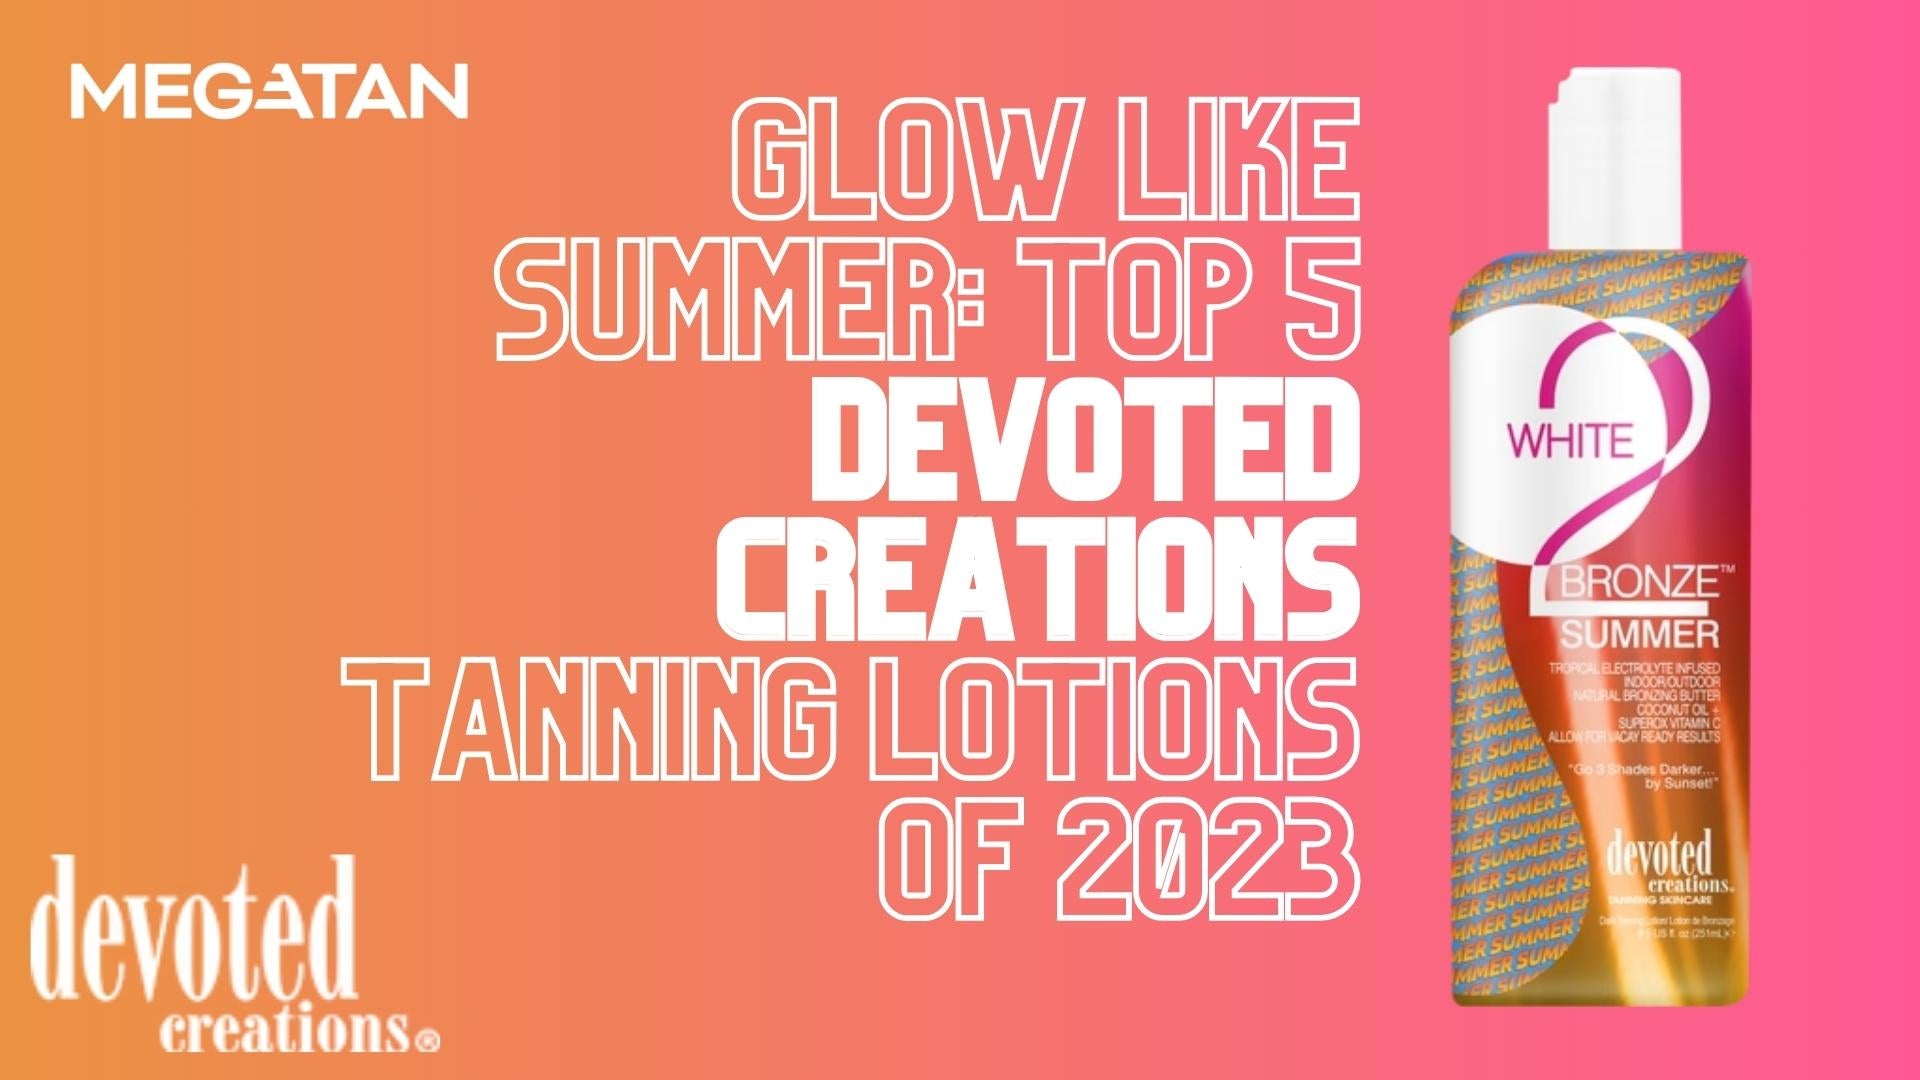 Glow Like Summer: Top 5 Devoted Creations Tanning Lotions of 2023